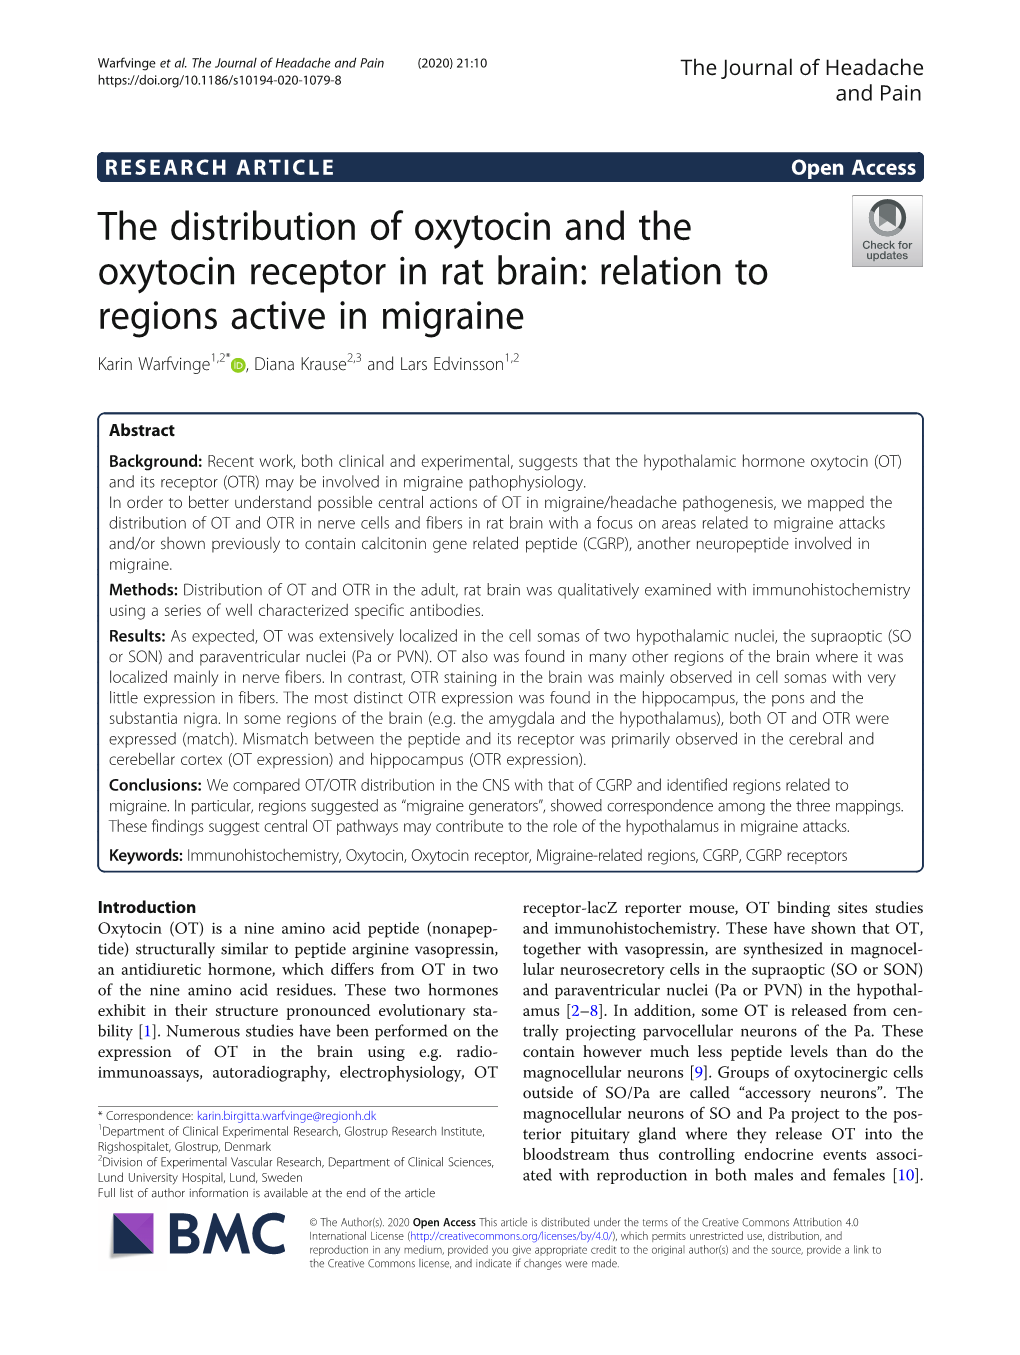 The Distribution of Oxytocin and the Oxytocin Receptor in Rat Brain: Relation to Regions Active in Migraine